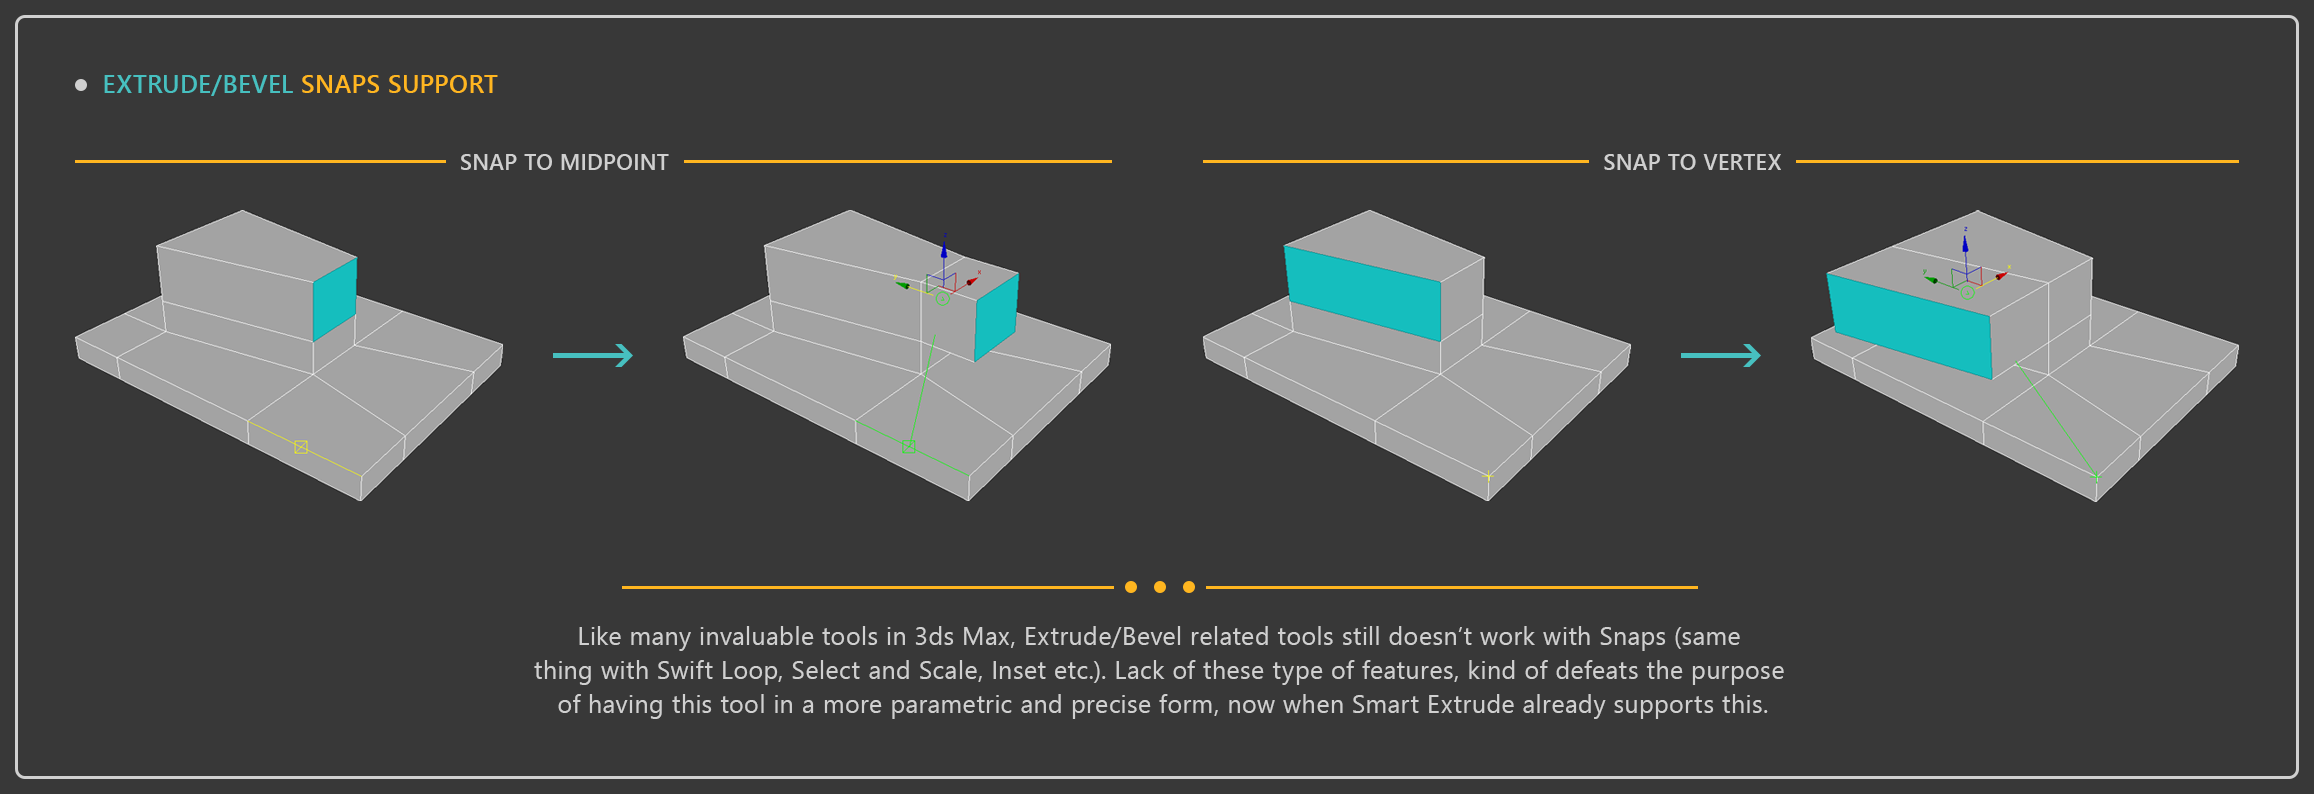 Extrude/Bevel Polygon/Extrude Along Spline/Inset etc.] Unified with further  enhancements: Bevel Pro... - Autodesk Community